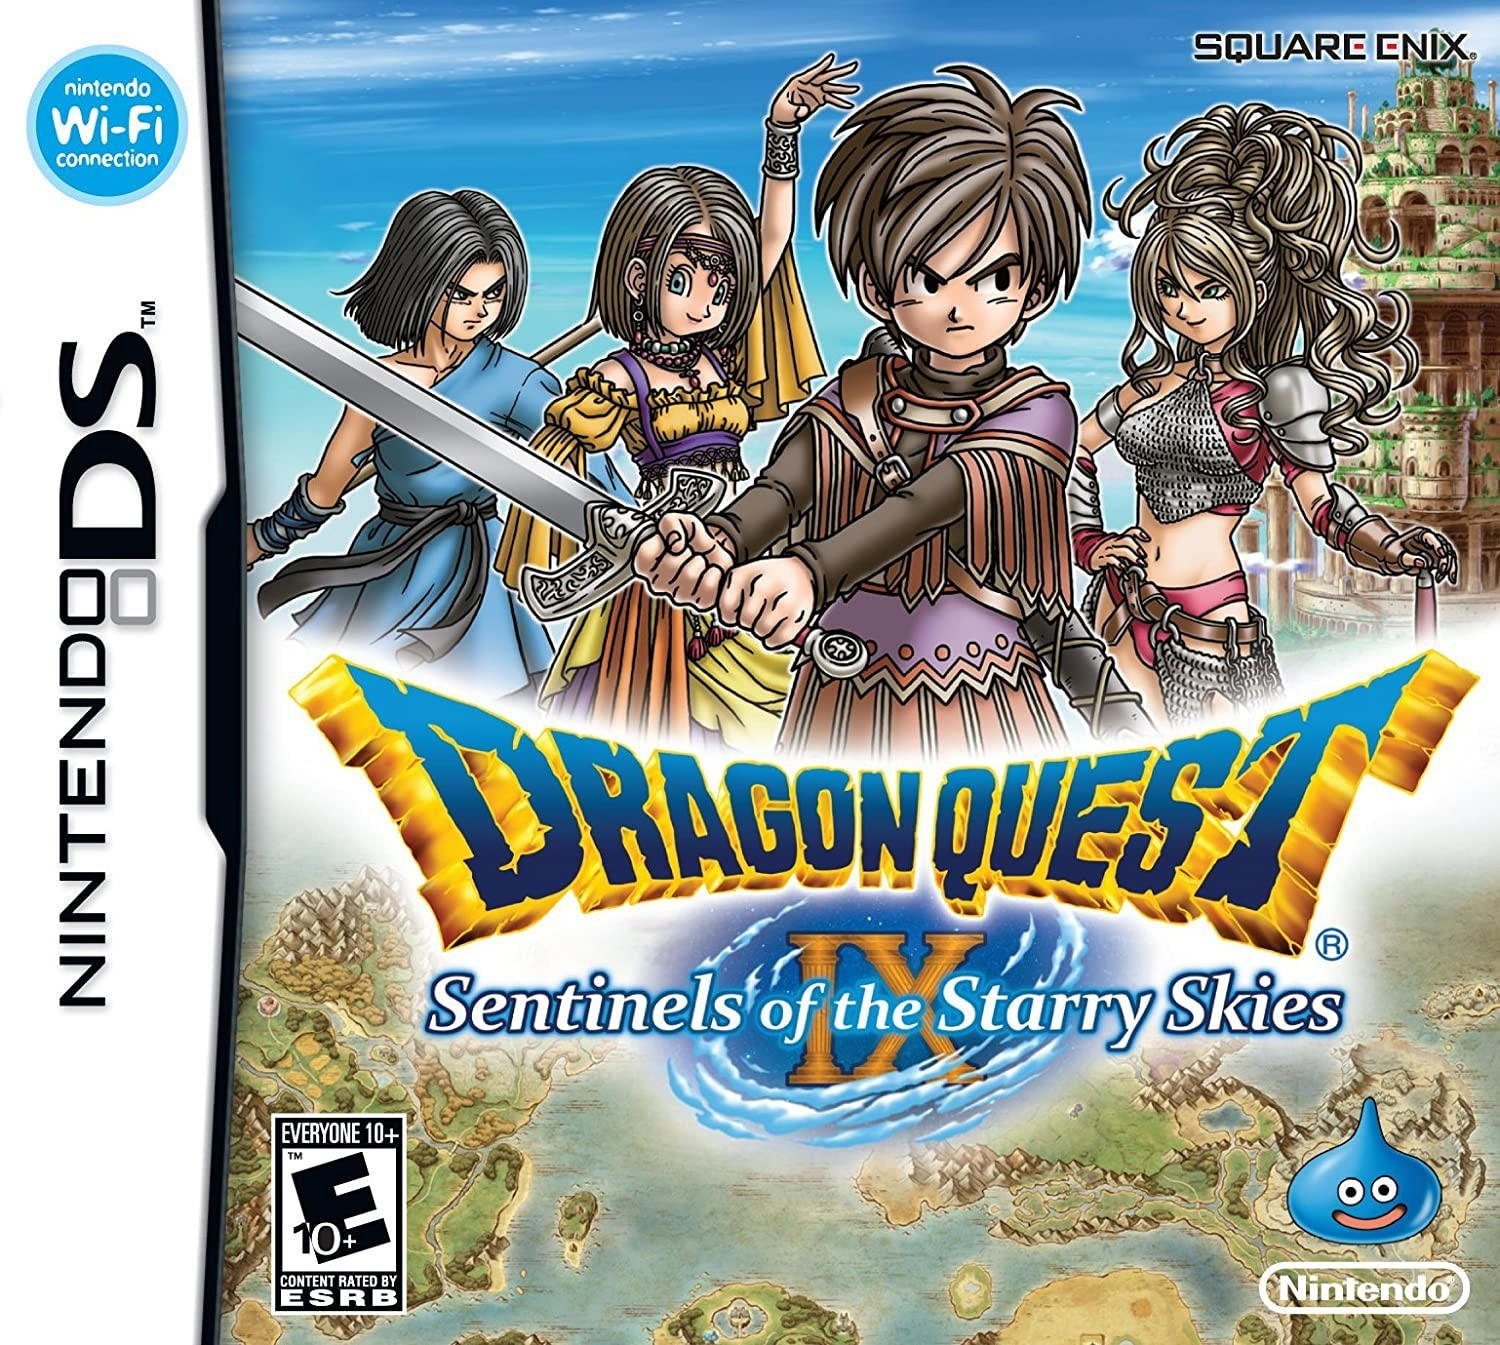 Dragon Quest: Sentinels of the Starry Skies (DS)